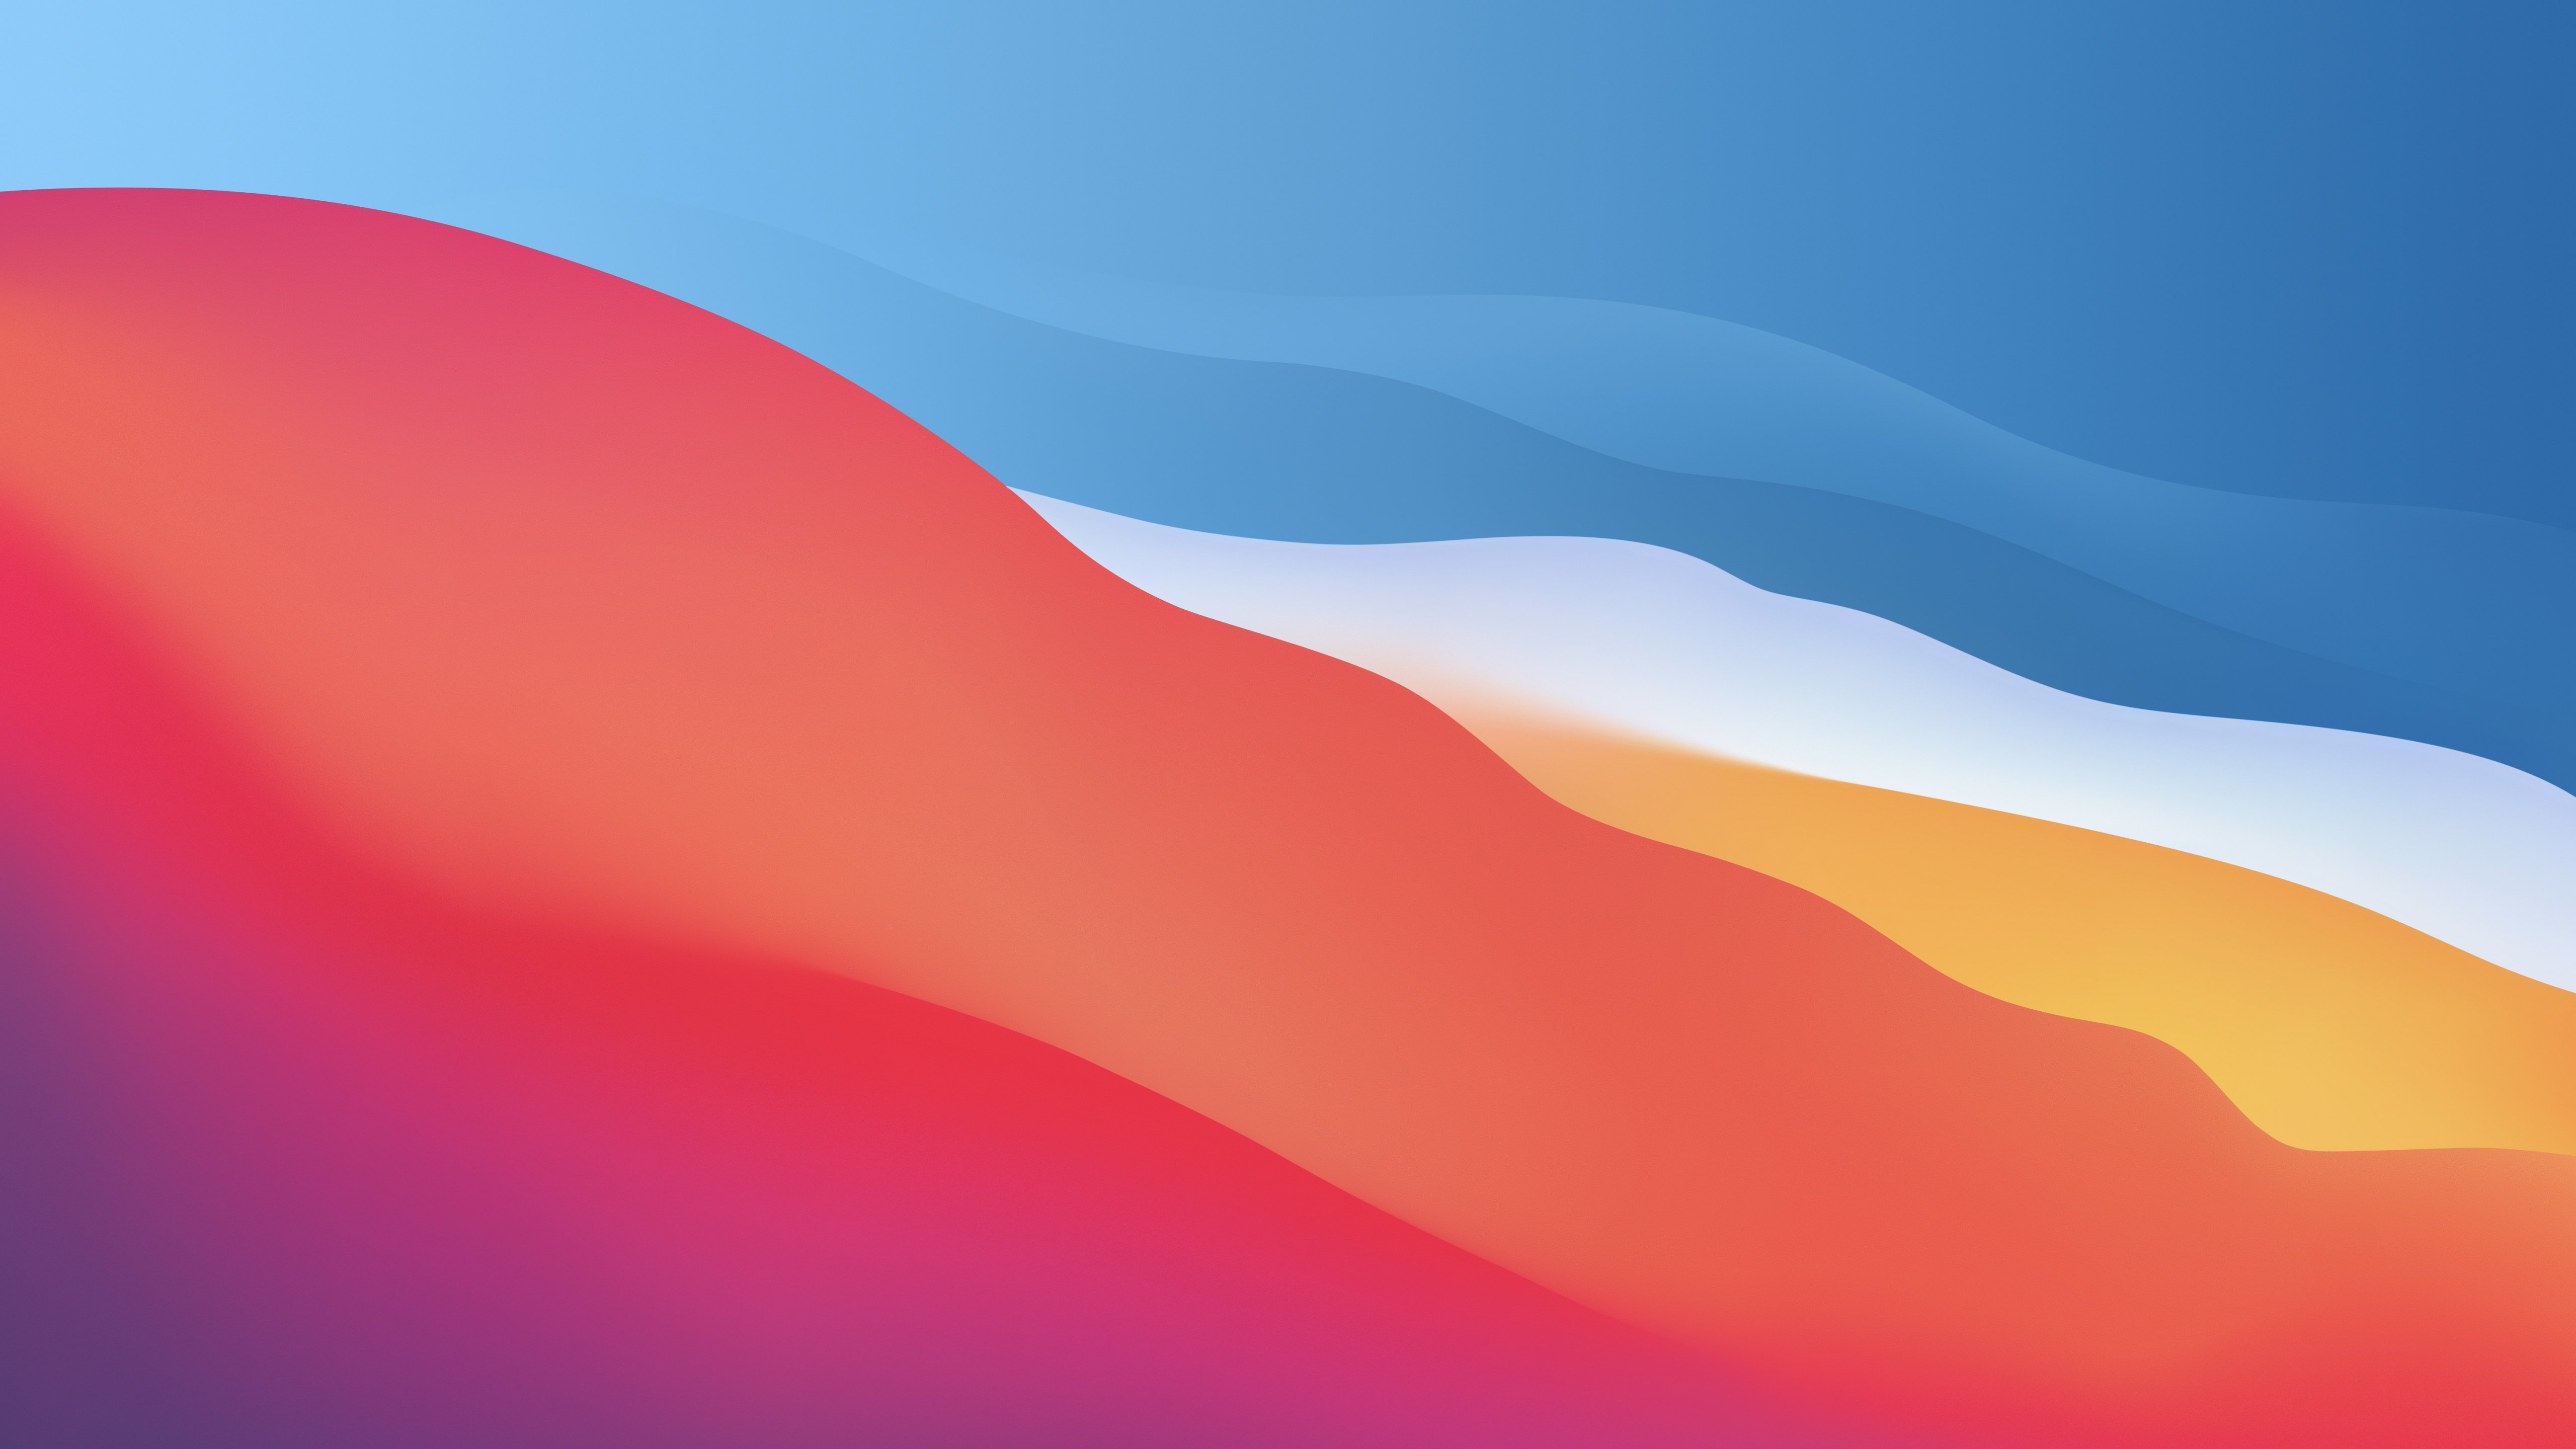 macOS Big Sur Wallpapers 4K, Colorful, Waves, Smooth, Stock, Apple, Aesthetic, Gradients,